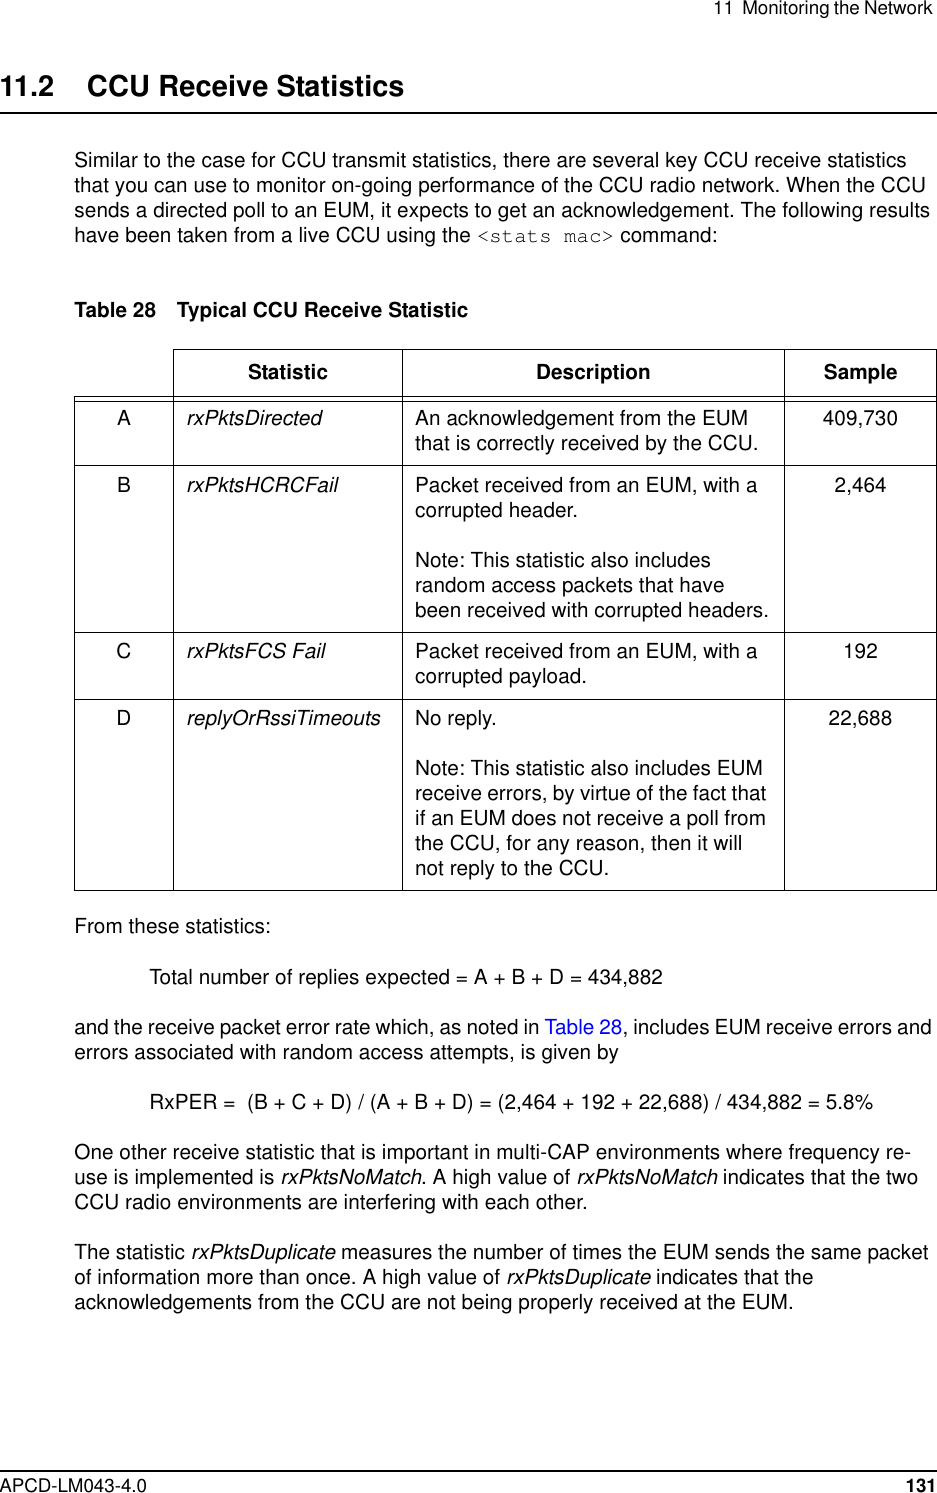 11 Monitoring the NetworkAPCD-LM043-4.0 13111.2 CCU Receive StatisticsSimilar to the case for CCU transmit statistics, there are several key CCU receive statisticsthat you can use to monitor on-going performance of the CCU radio network. When the CCUsends a directed poll to an EUM, it expects to get an acknowledgement. The following resultshave been taken from a live CCU using the &lt;stats mac&gt; command:Table 28 Typical CCU Receive StatisticFrom these statistics:Total number of replies expected = A + B + D = 434,882and the receive packet error rate which, as noted in Table 28, includes EUM receive errors anderrors associated with random access attempts, is given byRxPER= (B+C+D)/(A+B+D)=(2,464+192+22,688)/434,882=5.8%One other receive statistic that is important in multi-CAP environments where frequency re-use is implemented is rxPktsNoMatch. A high value of rxPktsNoMatch indicates that the twoCCU radio environments are interfering with each other.The statistic rxPktsDuplicate measures the number of times the EUM sends the same packetof information more than once. A high value of rxPktsDuplicate indicates that theacknowledgements from the CCU are not being properly received at the EUM.Statistic Description SampleArxPktsDirected An acknowledgement from the EUMthat is correctly received by the CCU. 409,730BrxPktsHCRCFail Packet received from an EUM, with acorrupted header.Note: This statistic also includesrandom access packets that havebeen received with corrupted headers.2,464CrxPktsFCS Fail Packet received from an EUM, with acorrupted payload. 192DreplyOrRssiTimeouts No reply.Note: This statistic also includes EUMreceive errors, by virtue of the fact thatif an EUM does not receive a poll fromthe CCU, for any reason, then it willnot reply to the CCU.22,688